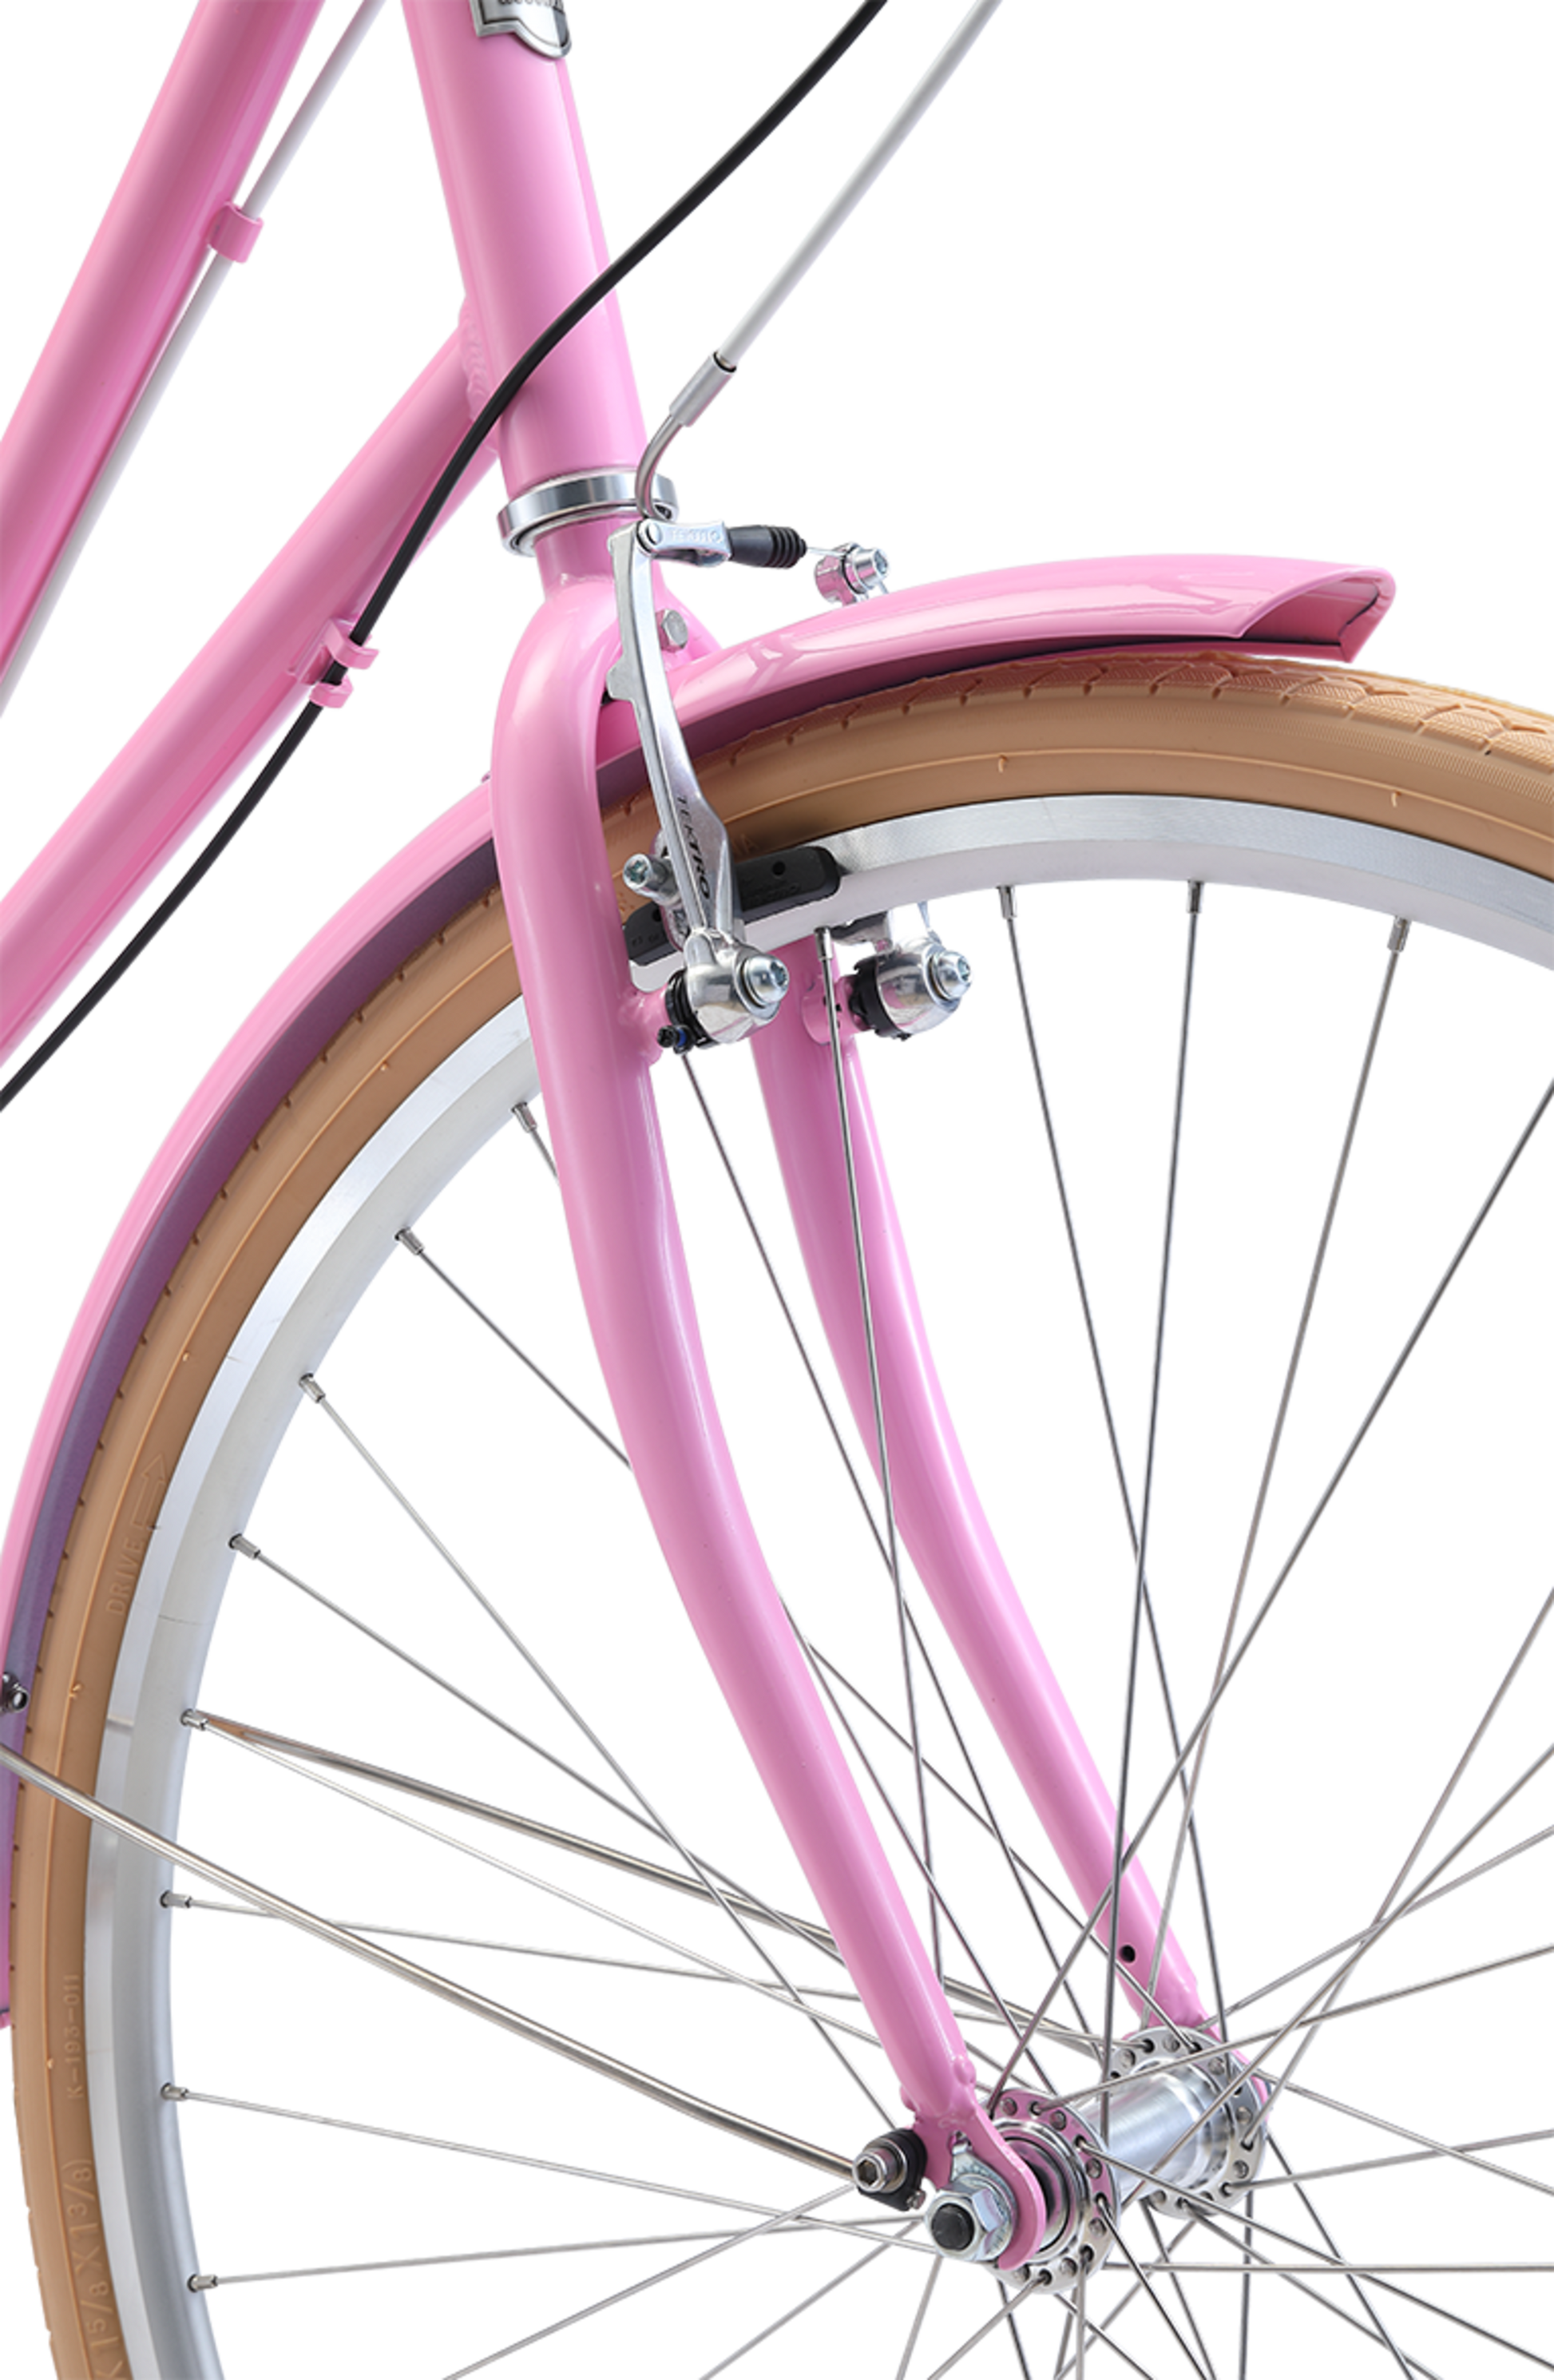 Ladies Deluxe Vintage Bike in Pink showing front Tektro Alloy V-brakes from Reid Cycles Australia